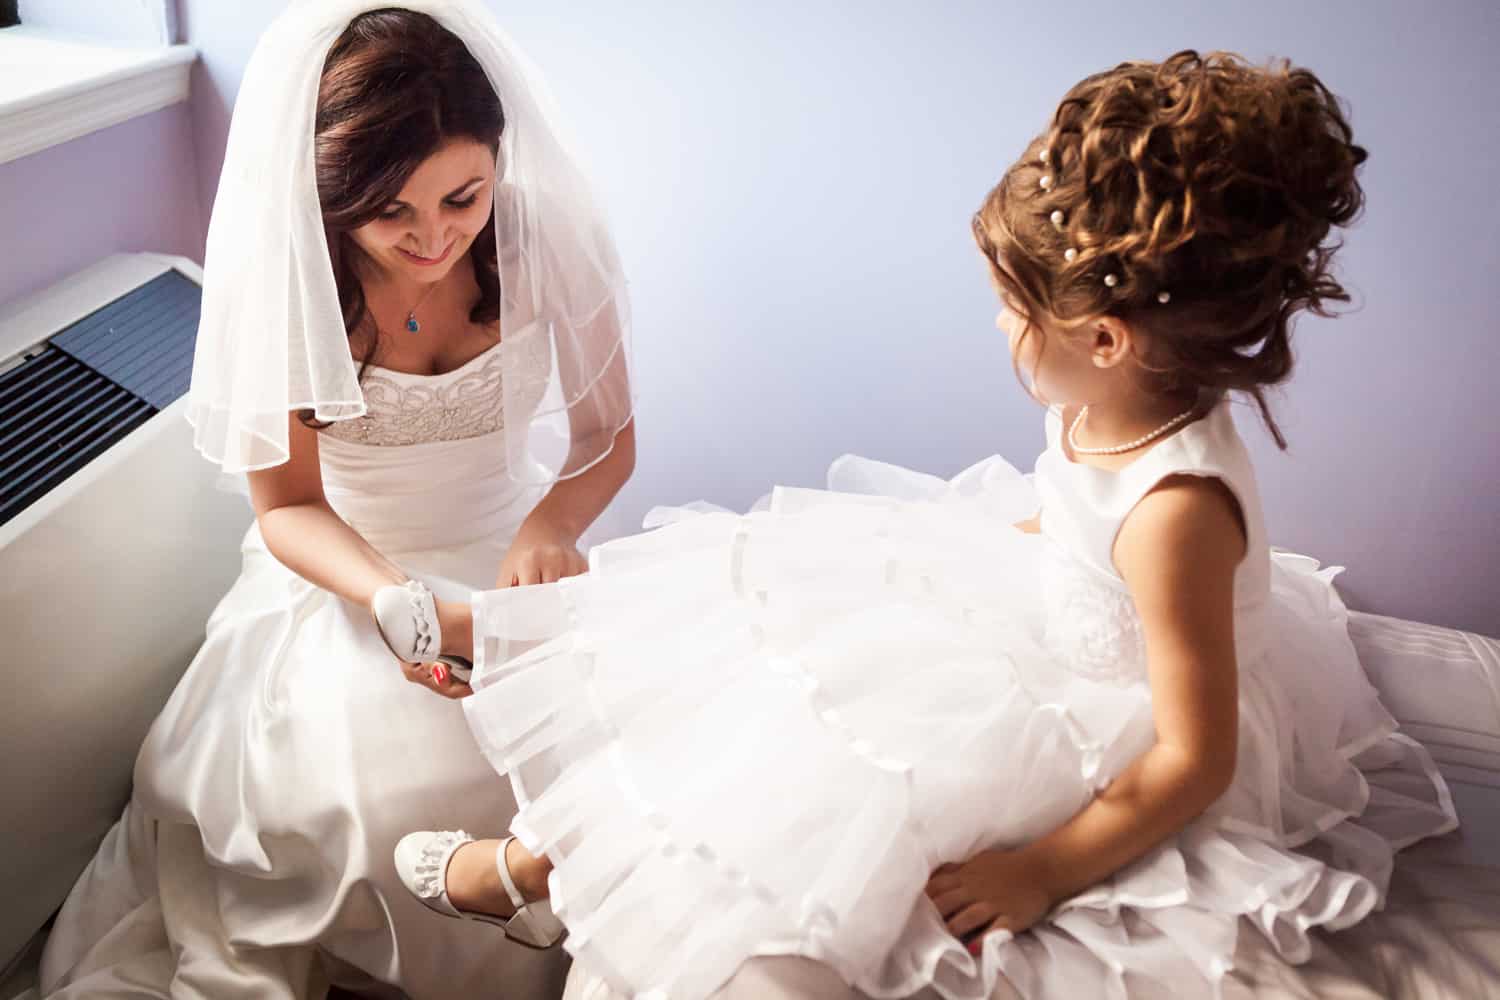 Bride helping flower girl put on her shoe